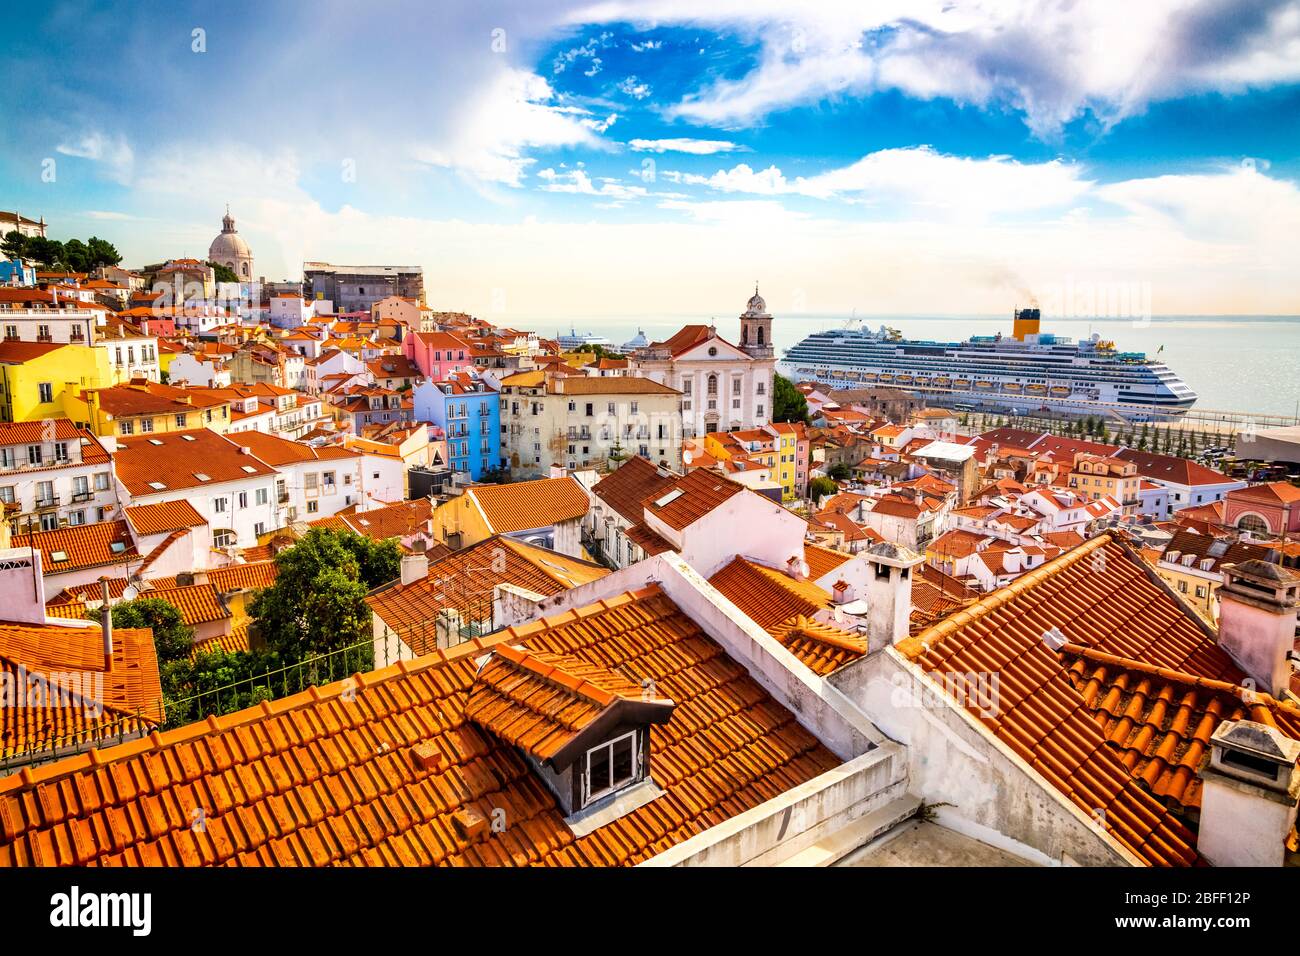 Alfama old town district viewed from Miradouro das Portas do Sol observation point in Lisbon, Portugal Stock Photo